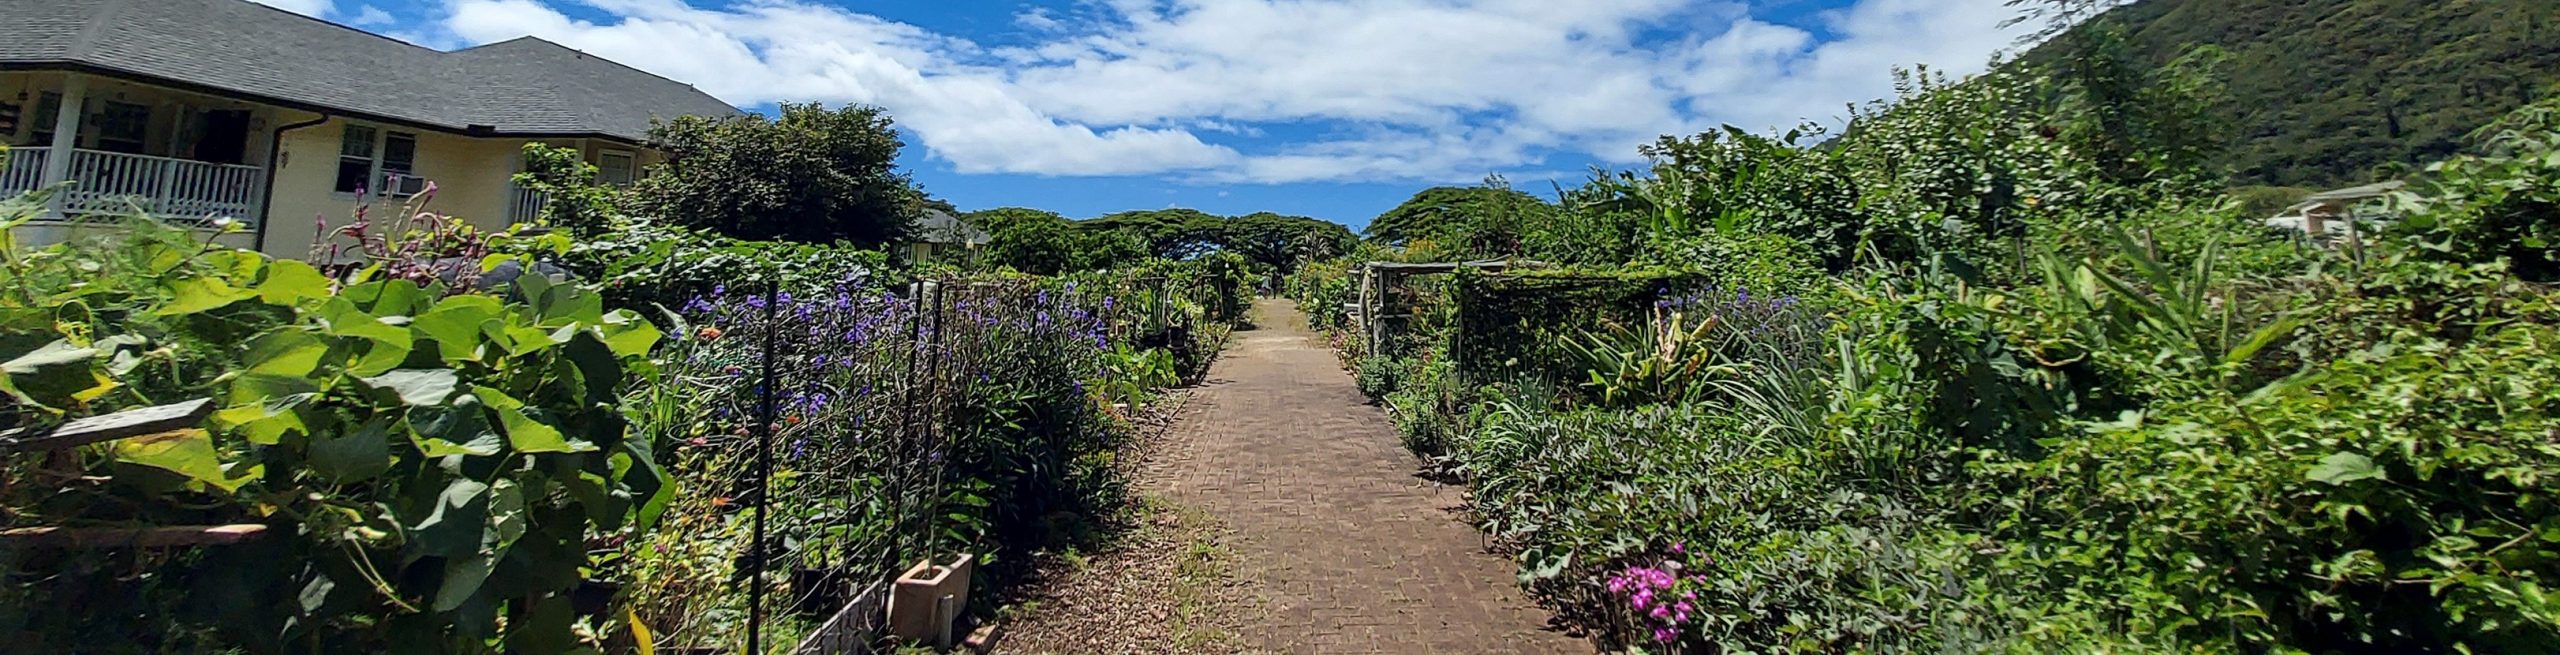 Pathway running through the center of Manoa Community Garden with blue skies and lush green growth.